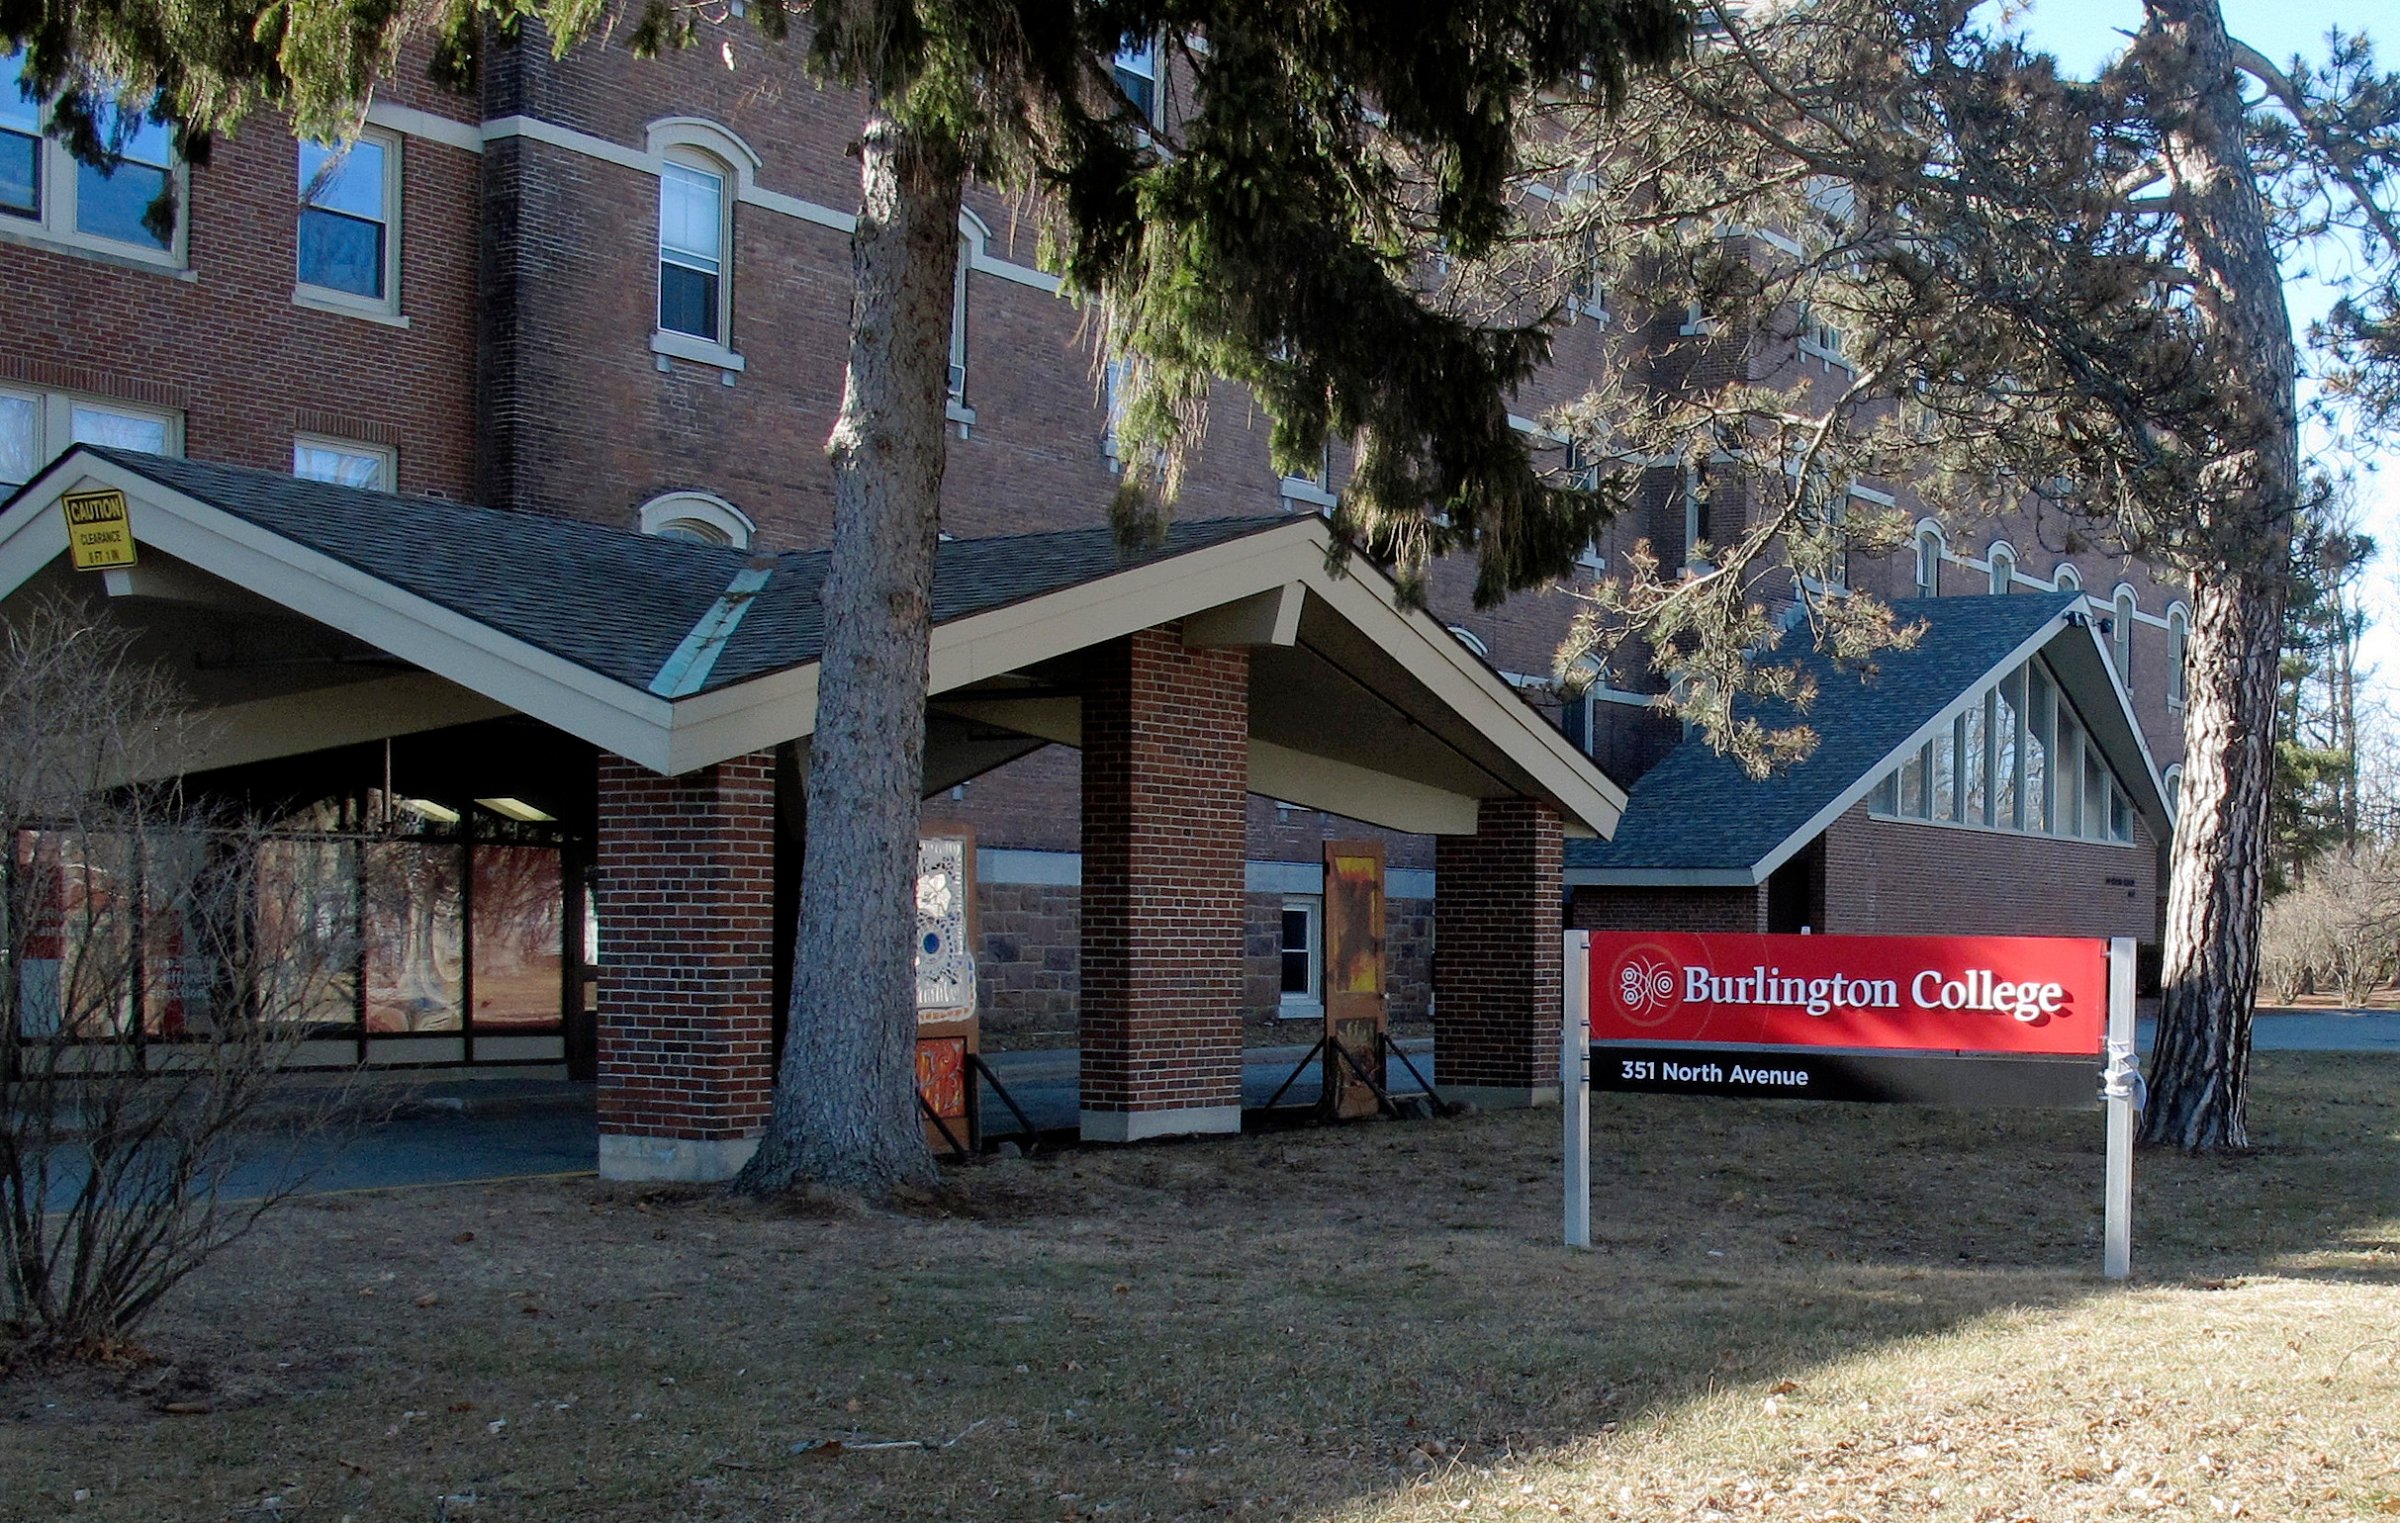 This Feb. 22, 2015 photo shows a building on the campus of Burlington College in Burlington, Vt. The college, formerly headed by Jane Sanders, wife of presidential candidate Bernie Sanders, announced Monday, May 16, 2016, it is closing. The school has been struggling under the weight of its $10 million purchase of property and buildings during from the Roman Catholic Diocese of Burlington that it made during her presidency. (AP Photo/Wilson Ring)